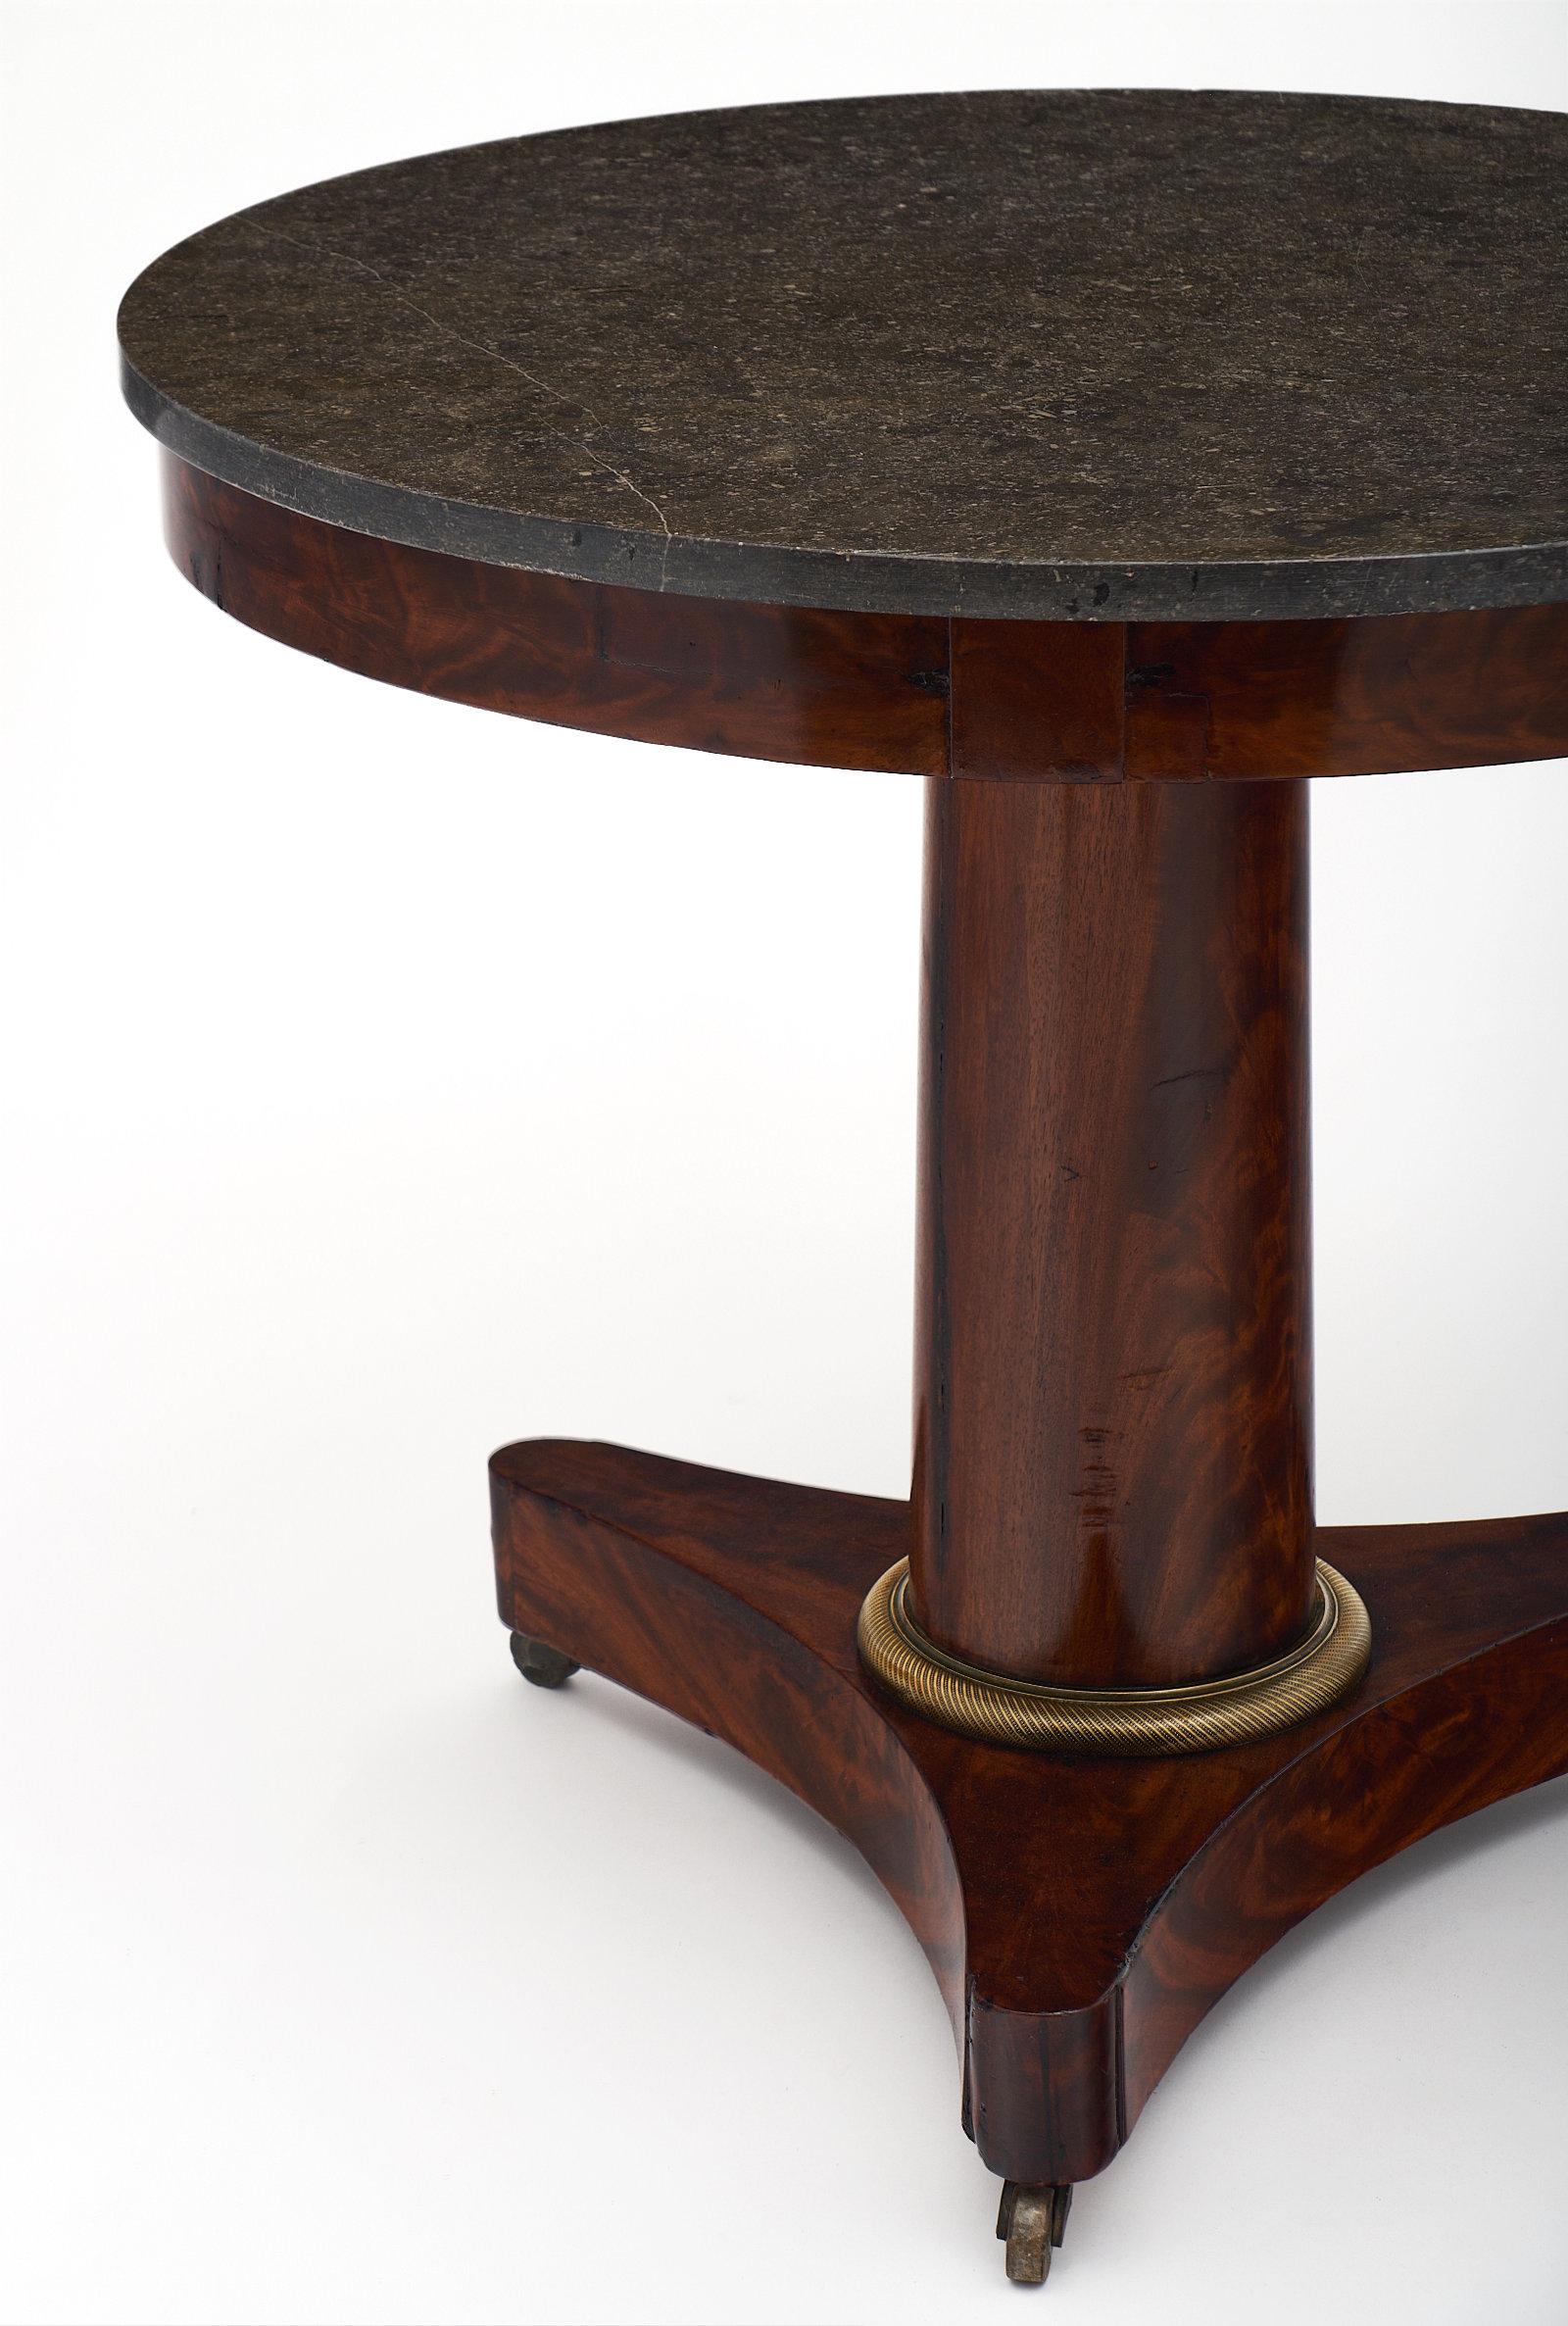 Empire style flamed mahogany gueridon with a gray marble top and bronze hardware. The dark color of the marble is very elegant, and the French polish finish of the base adds a sophisticated luster. This piece is supported by casters. We love the